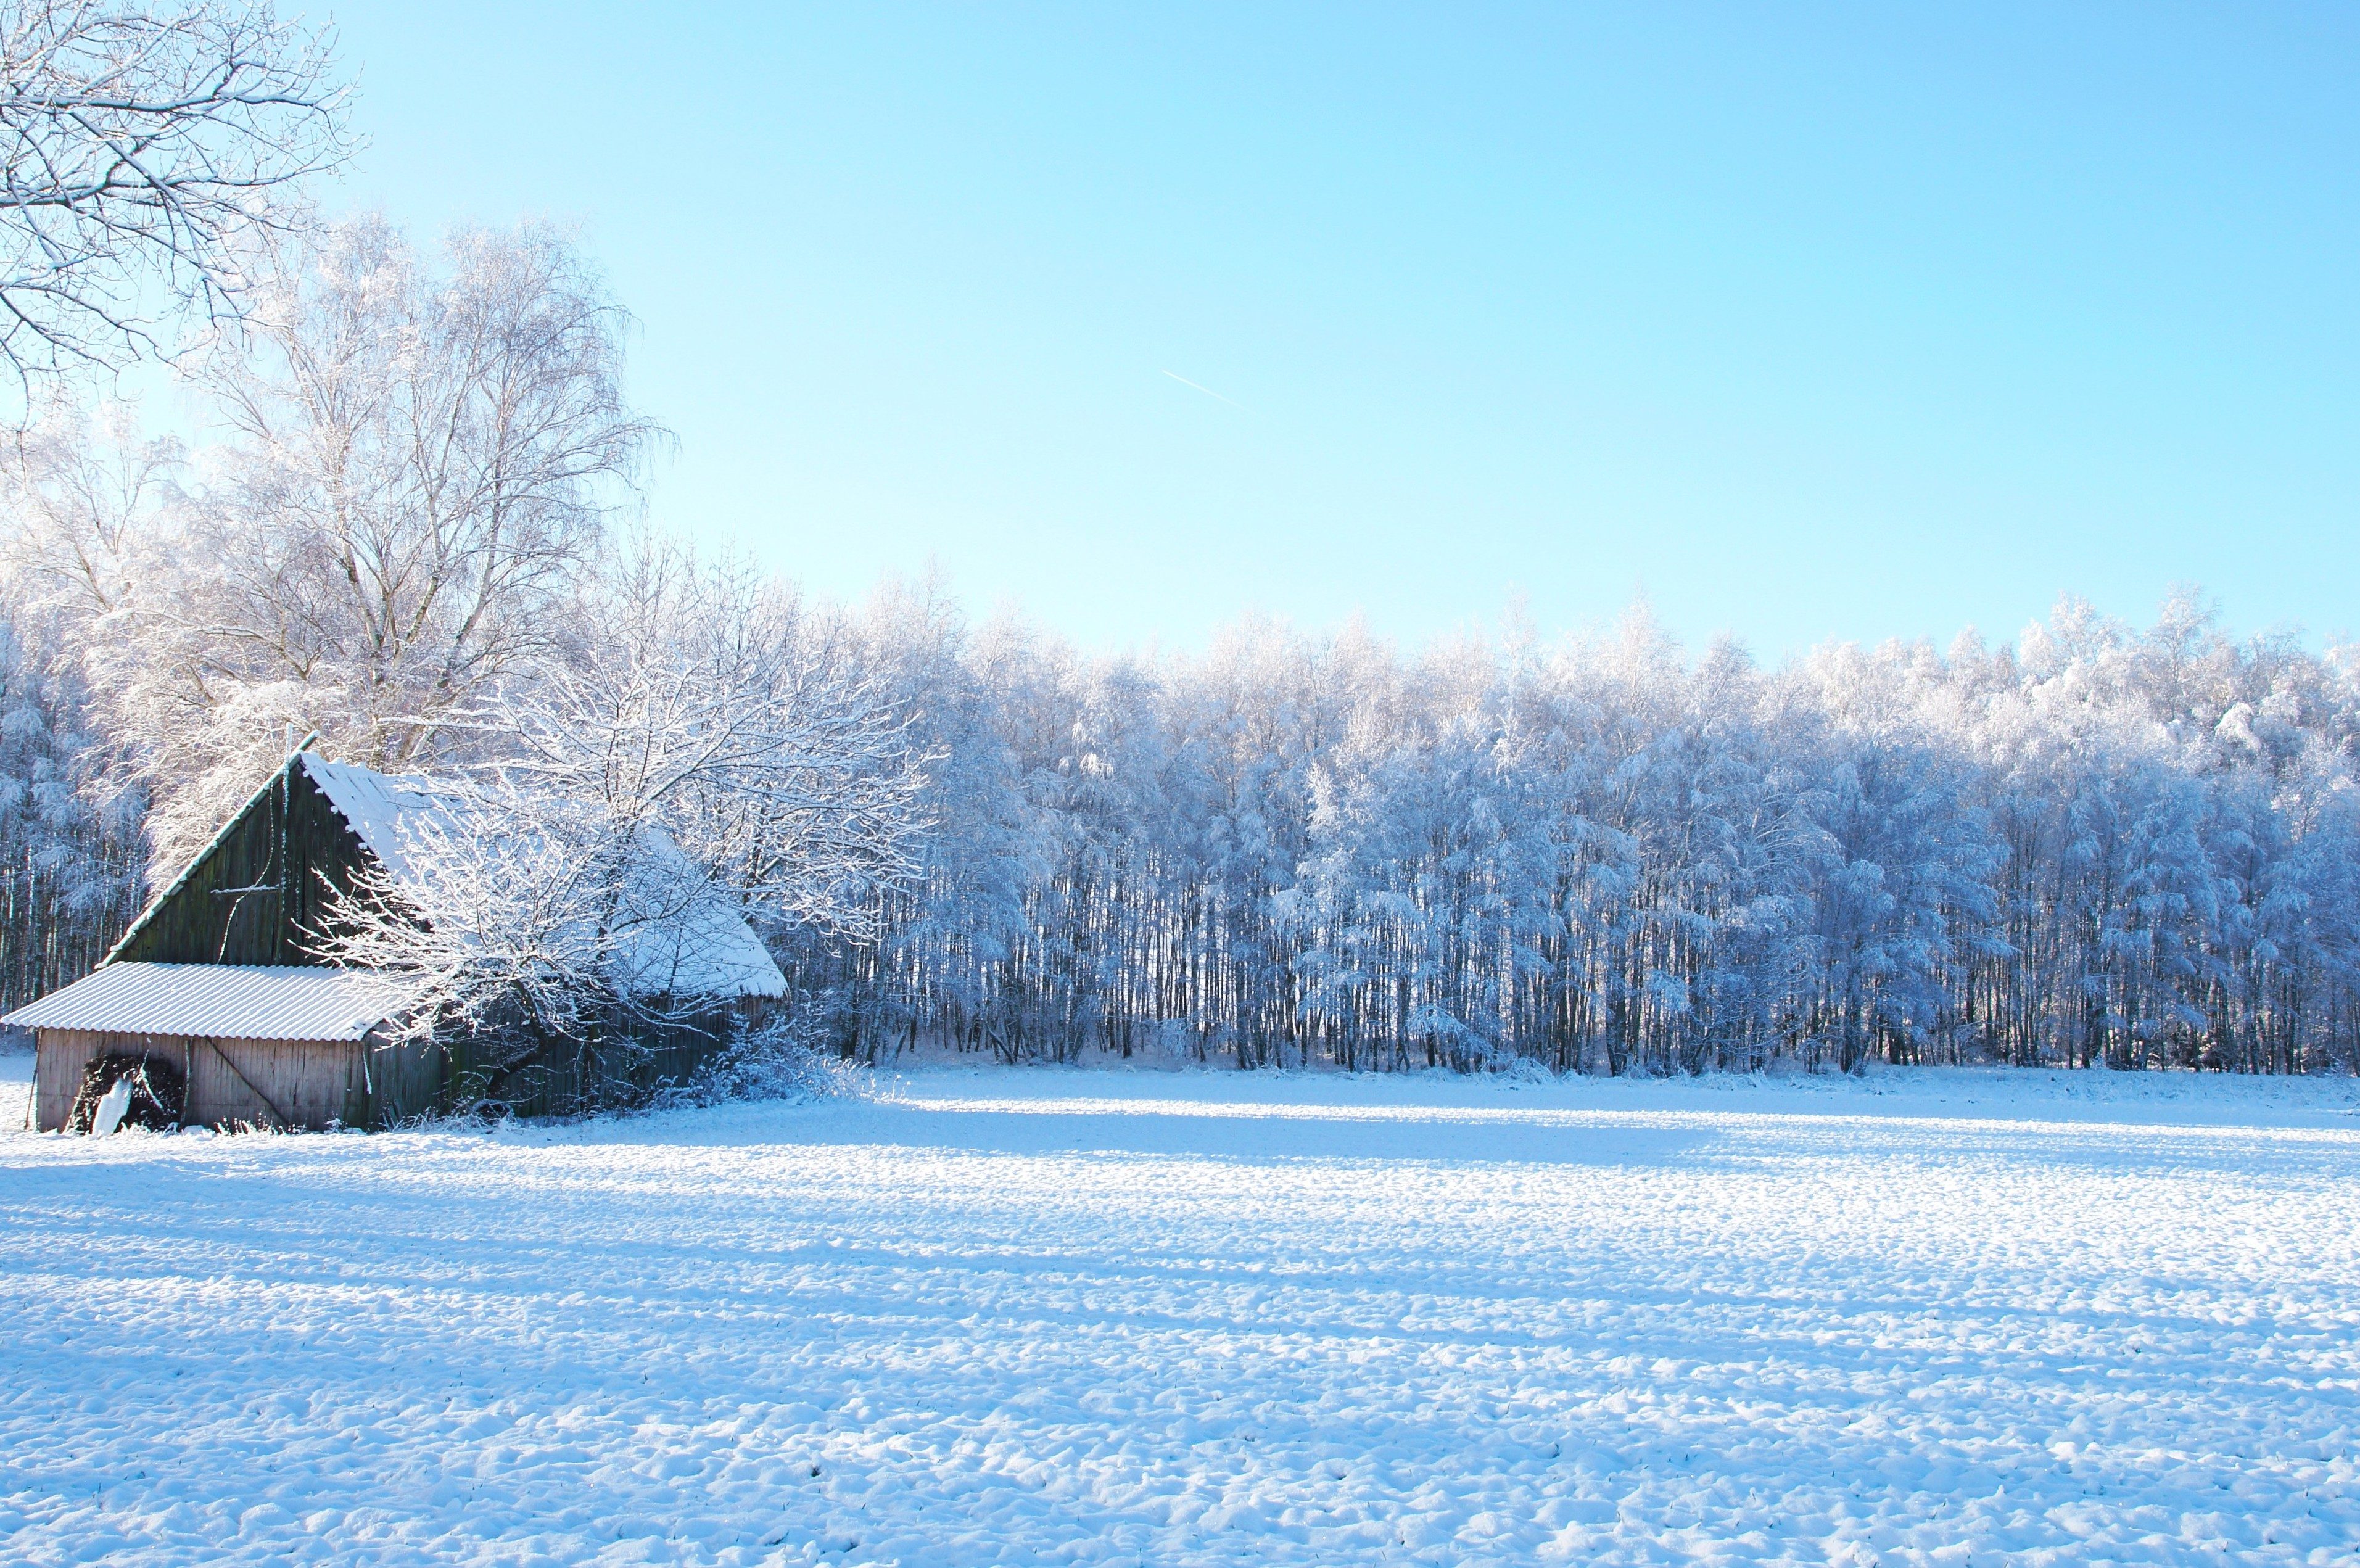 Free picture: winter, landscape, trees, snow, field, barn house ...